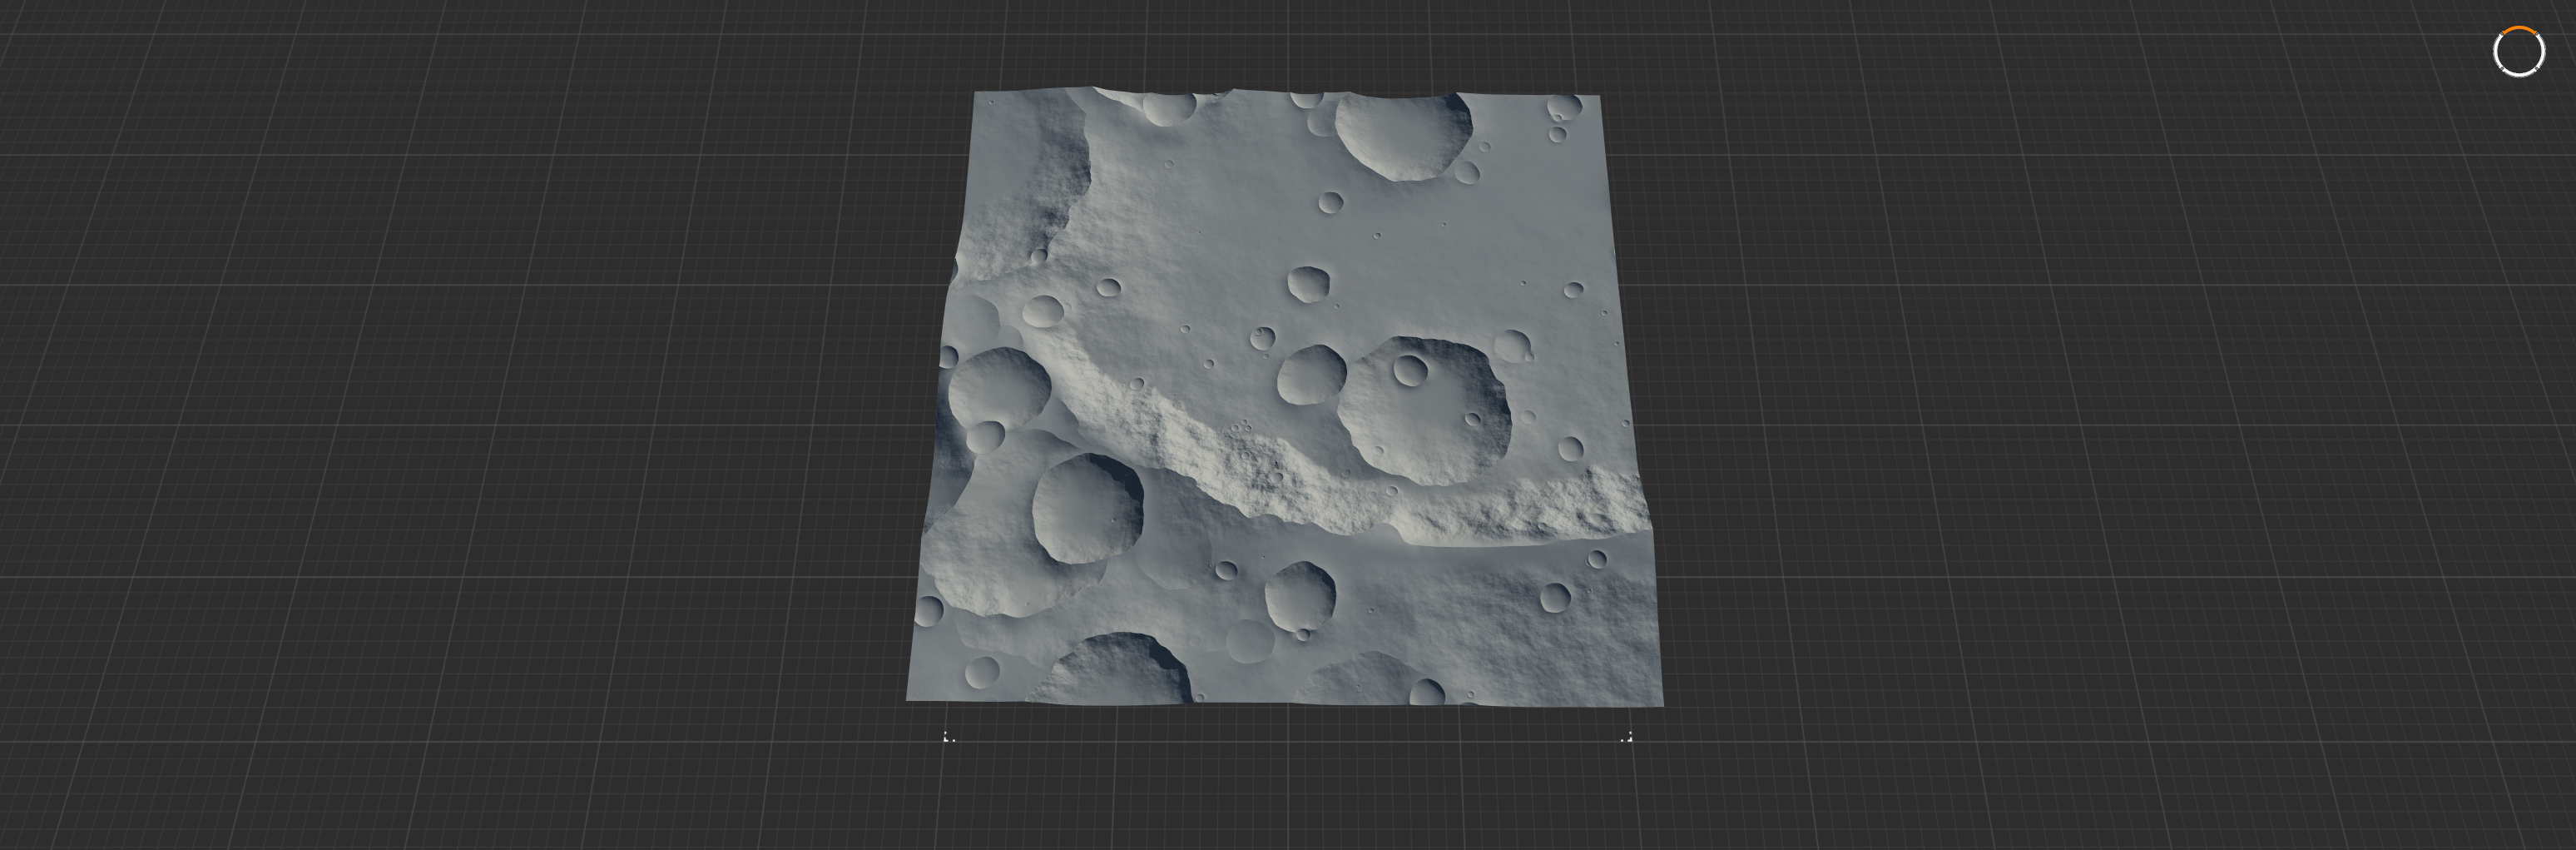 Crater: Scale = 4.0